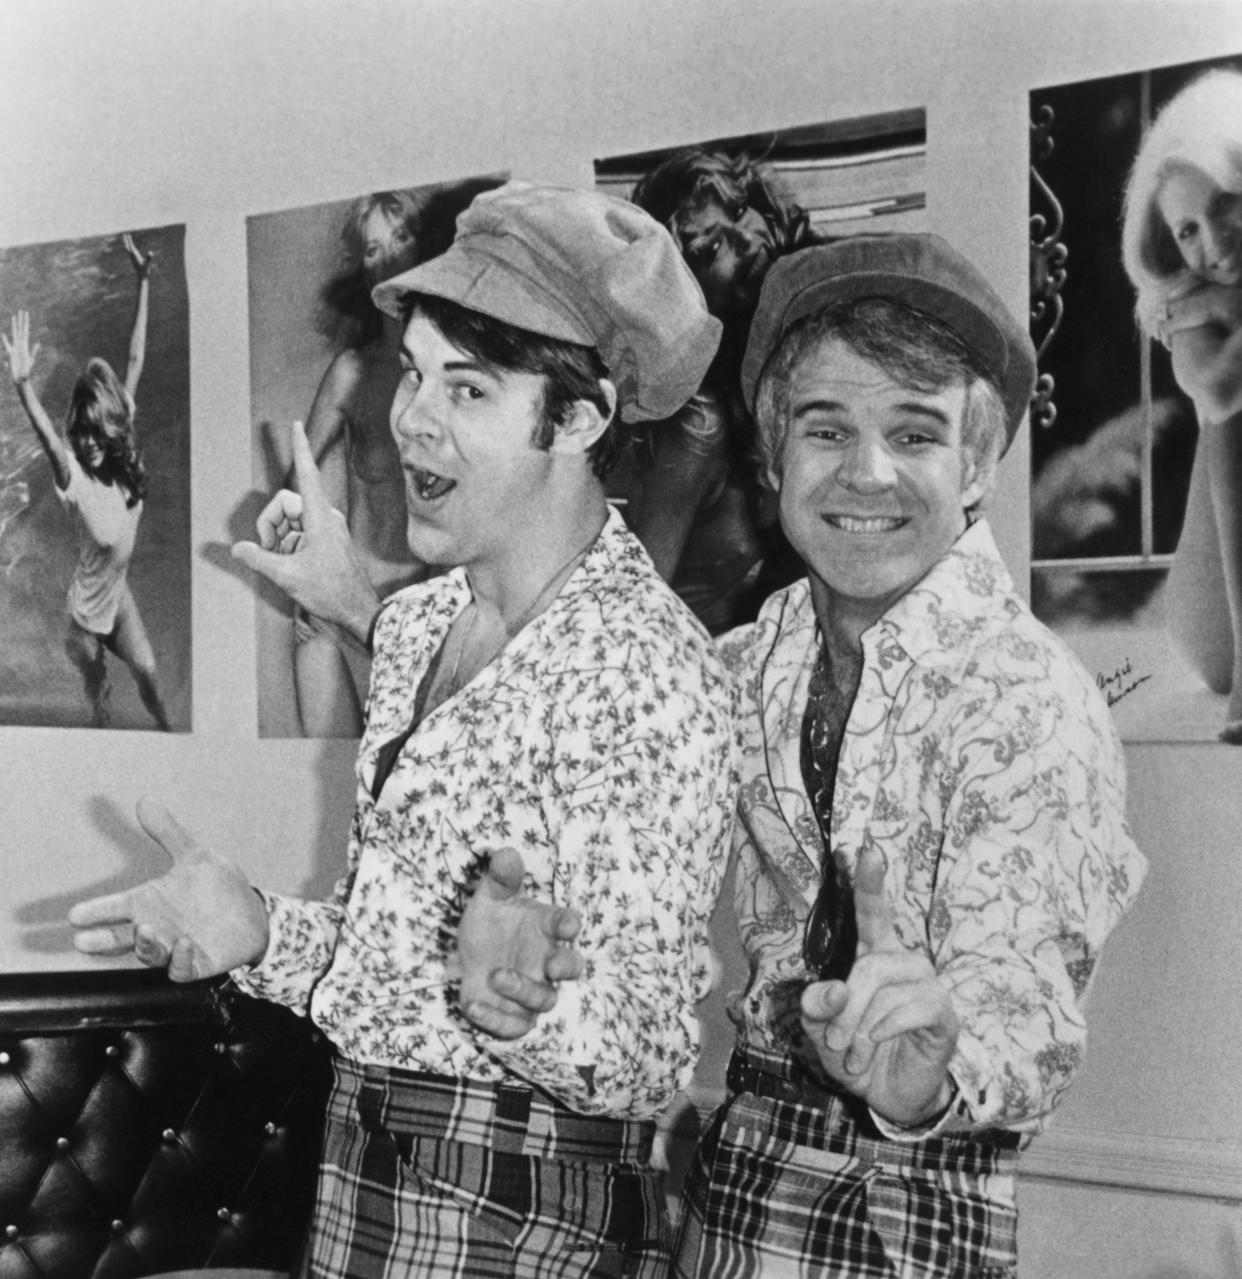 "We are two wild and crazy guys," Comedians Dan Aykroyd and Steve Martin as Georg and Yortuk, the Festrunk Brothers, a staple on Saturday Night Live in the late 70s. In 1980, Martin would pivot to films, as discussed in the new documentary, "Steve!"